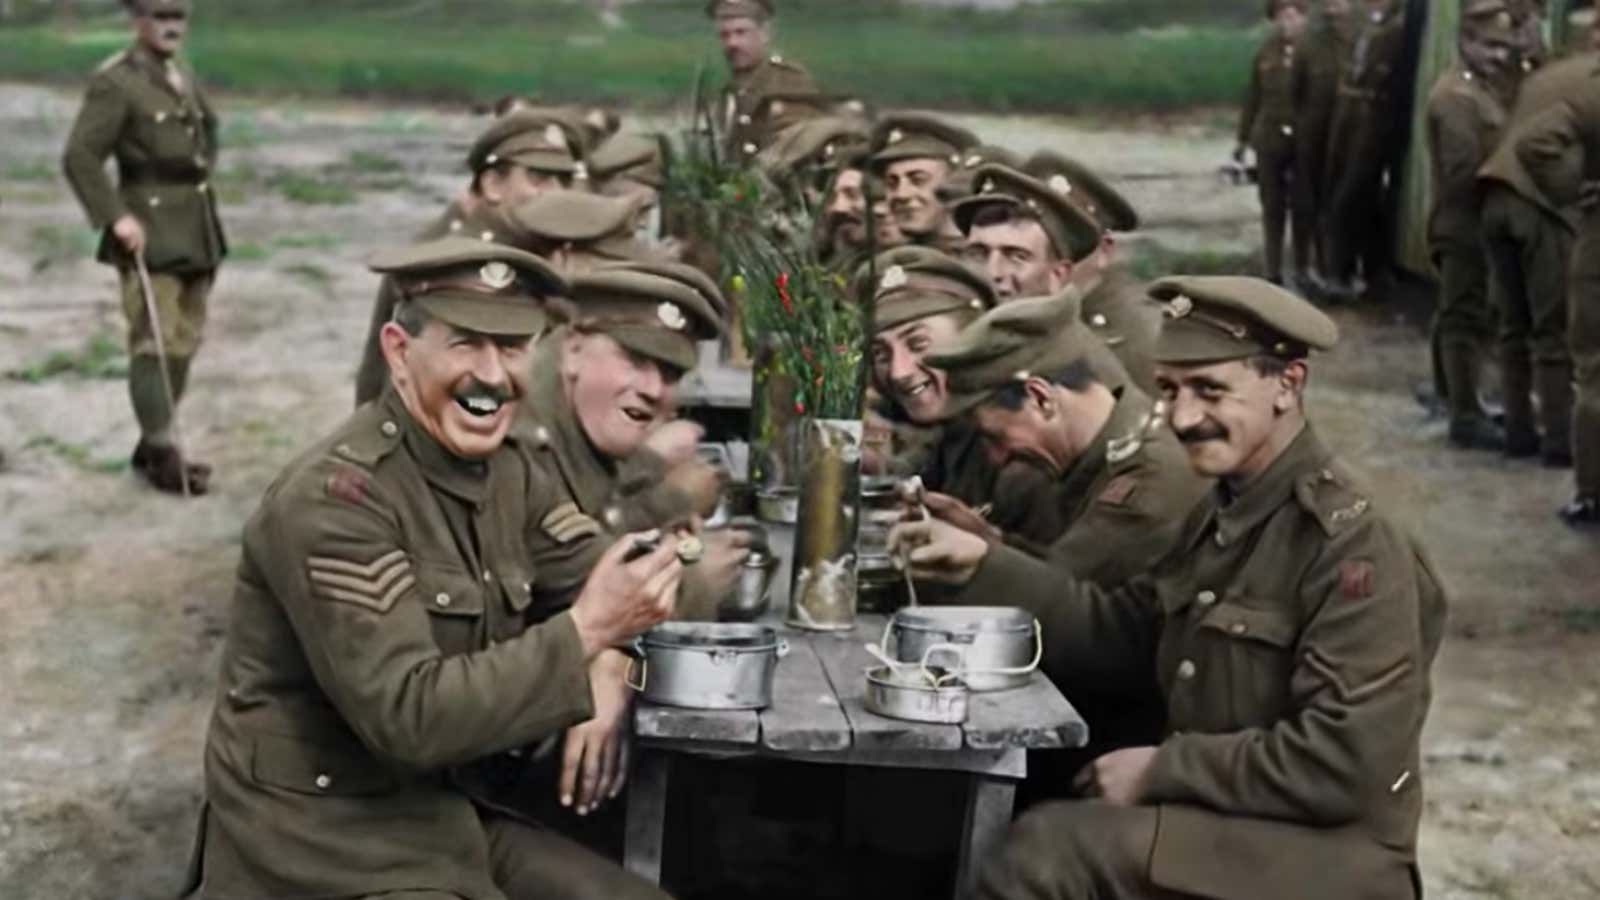 The 100-year-old footage has been digitally restored and colorized.